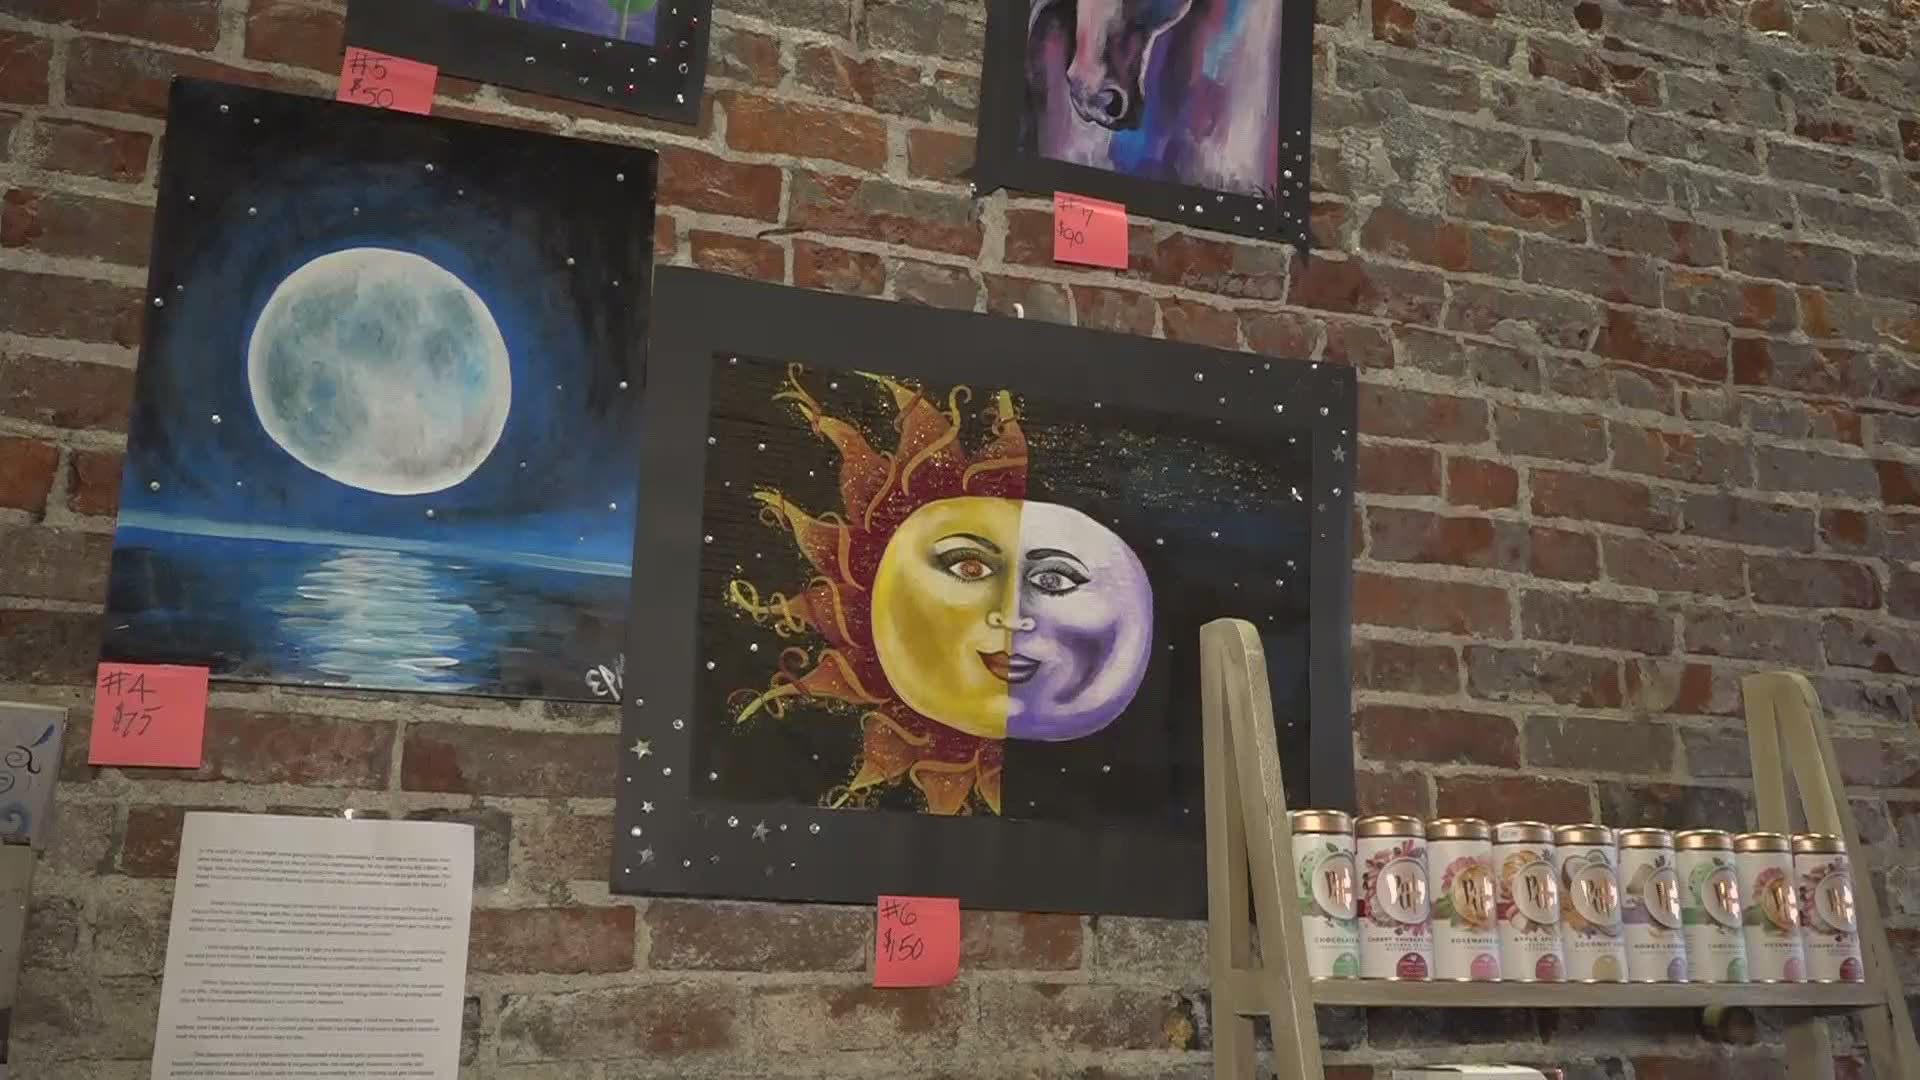 Elizabeth Mikotowicz's artwork is featured at the Adams Community Gallery in Bangor for the month of September to raise awareness about addiction and recovery.